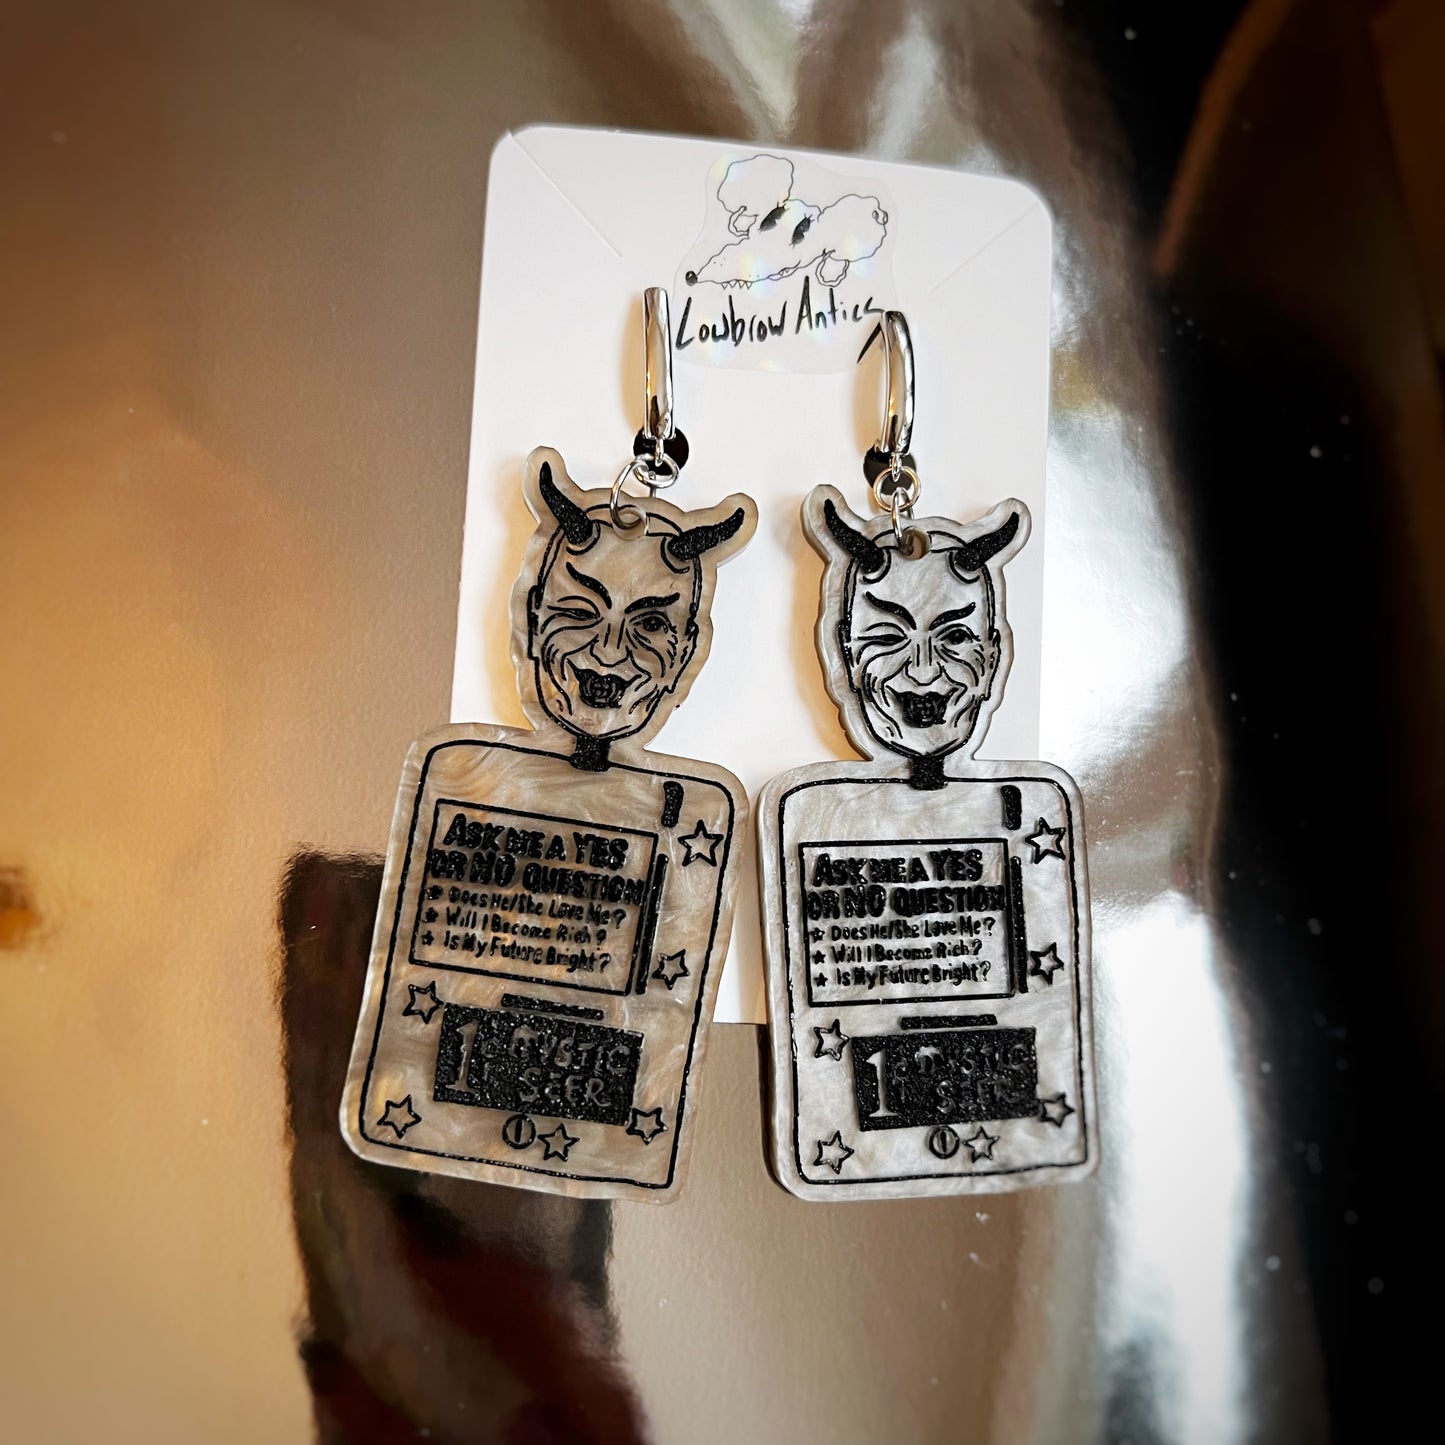 Nick of Time Earrings (Twilight Zone Inspired Collection)